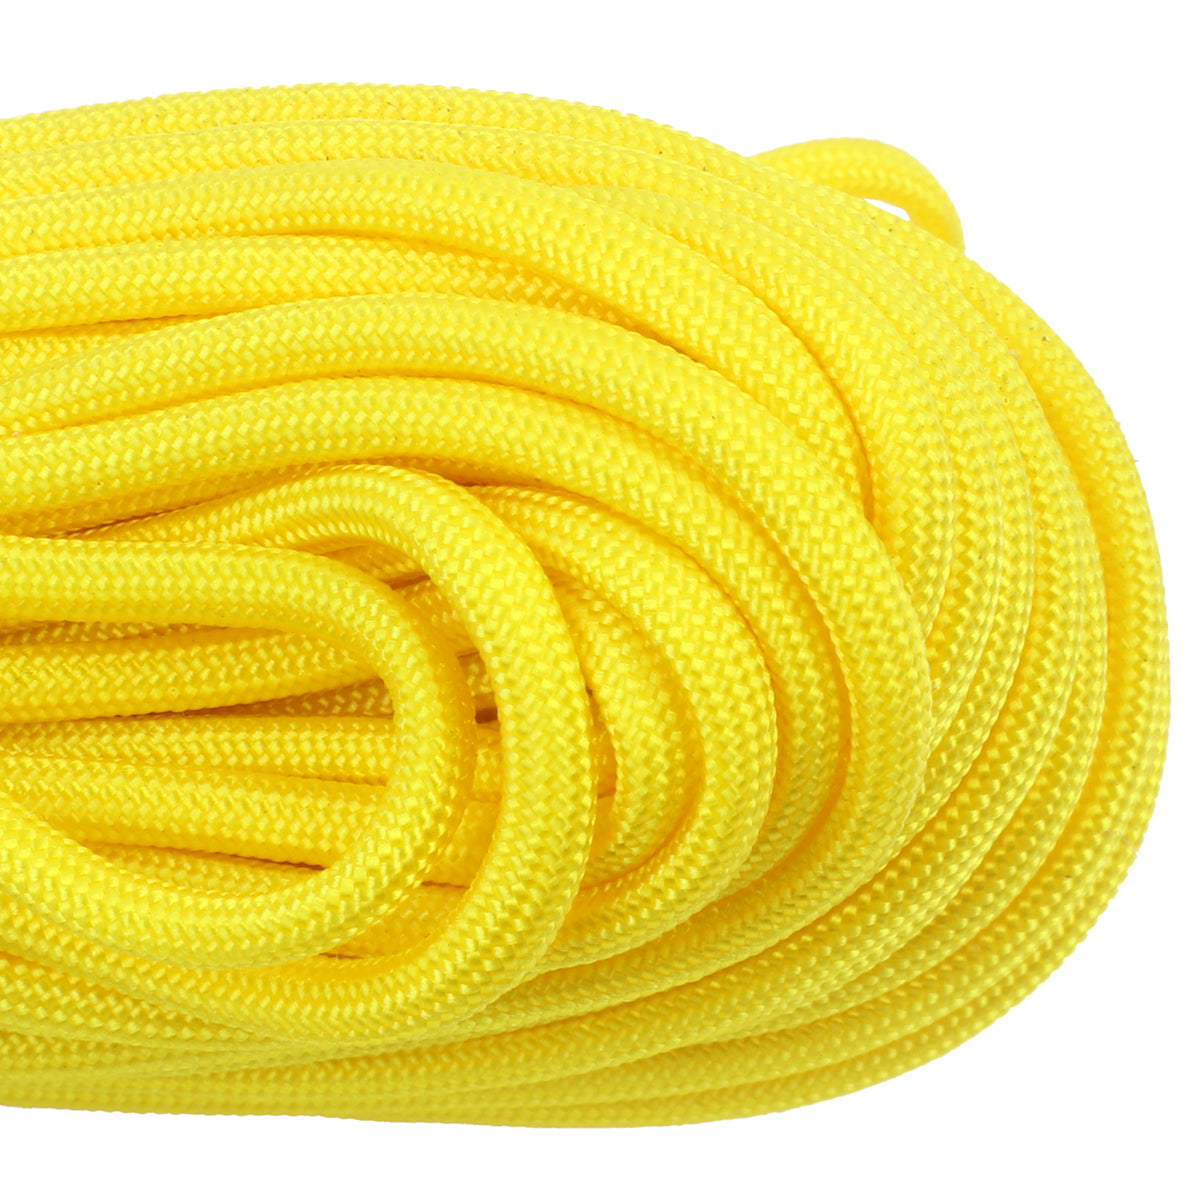 550 Paracord - Golden Yellow – Atwood Rope MFG